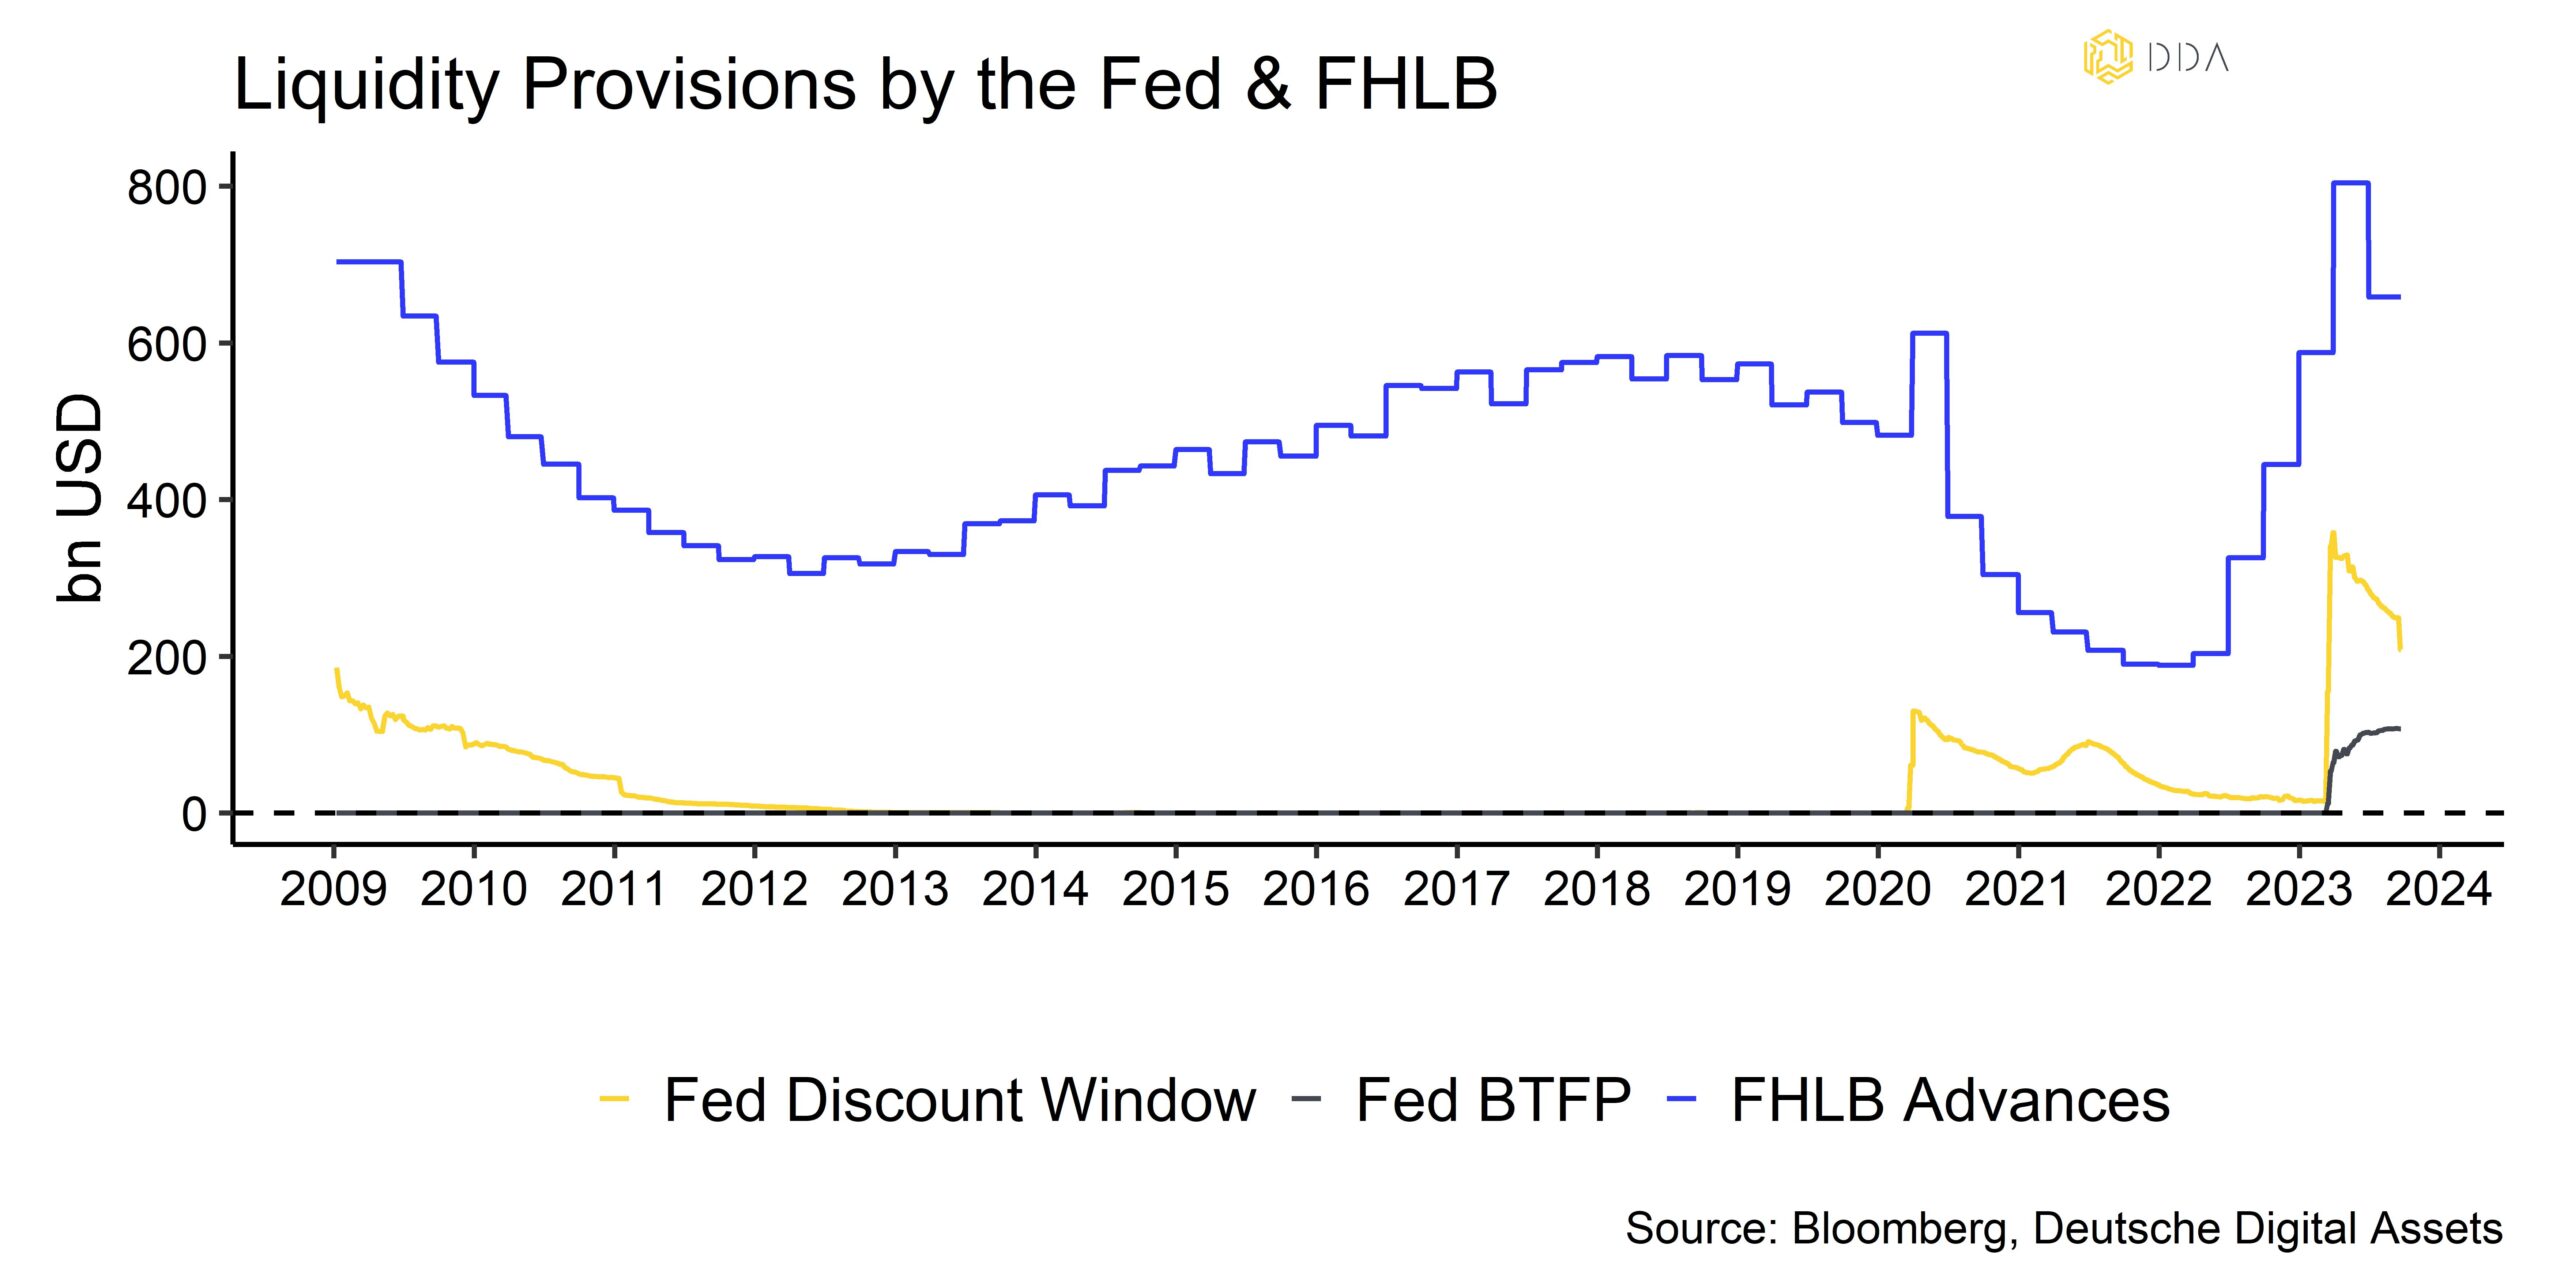 Liquidity Provisions by the Fed & FHLB